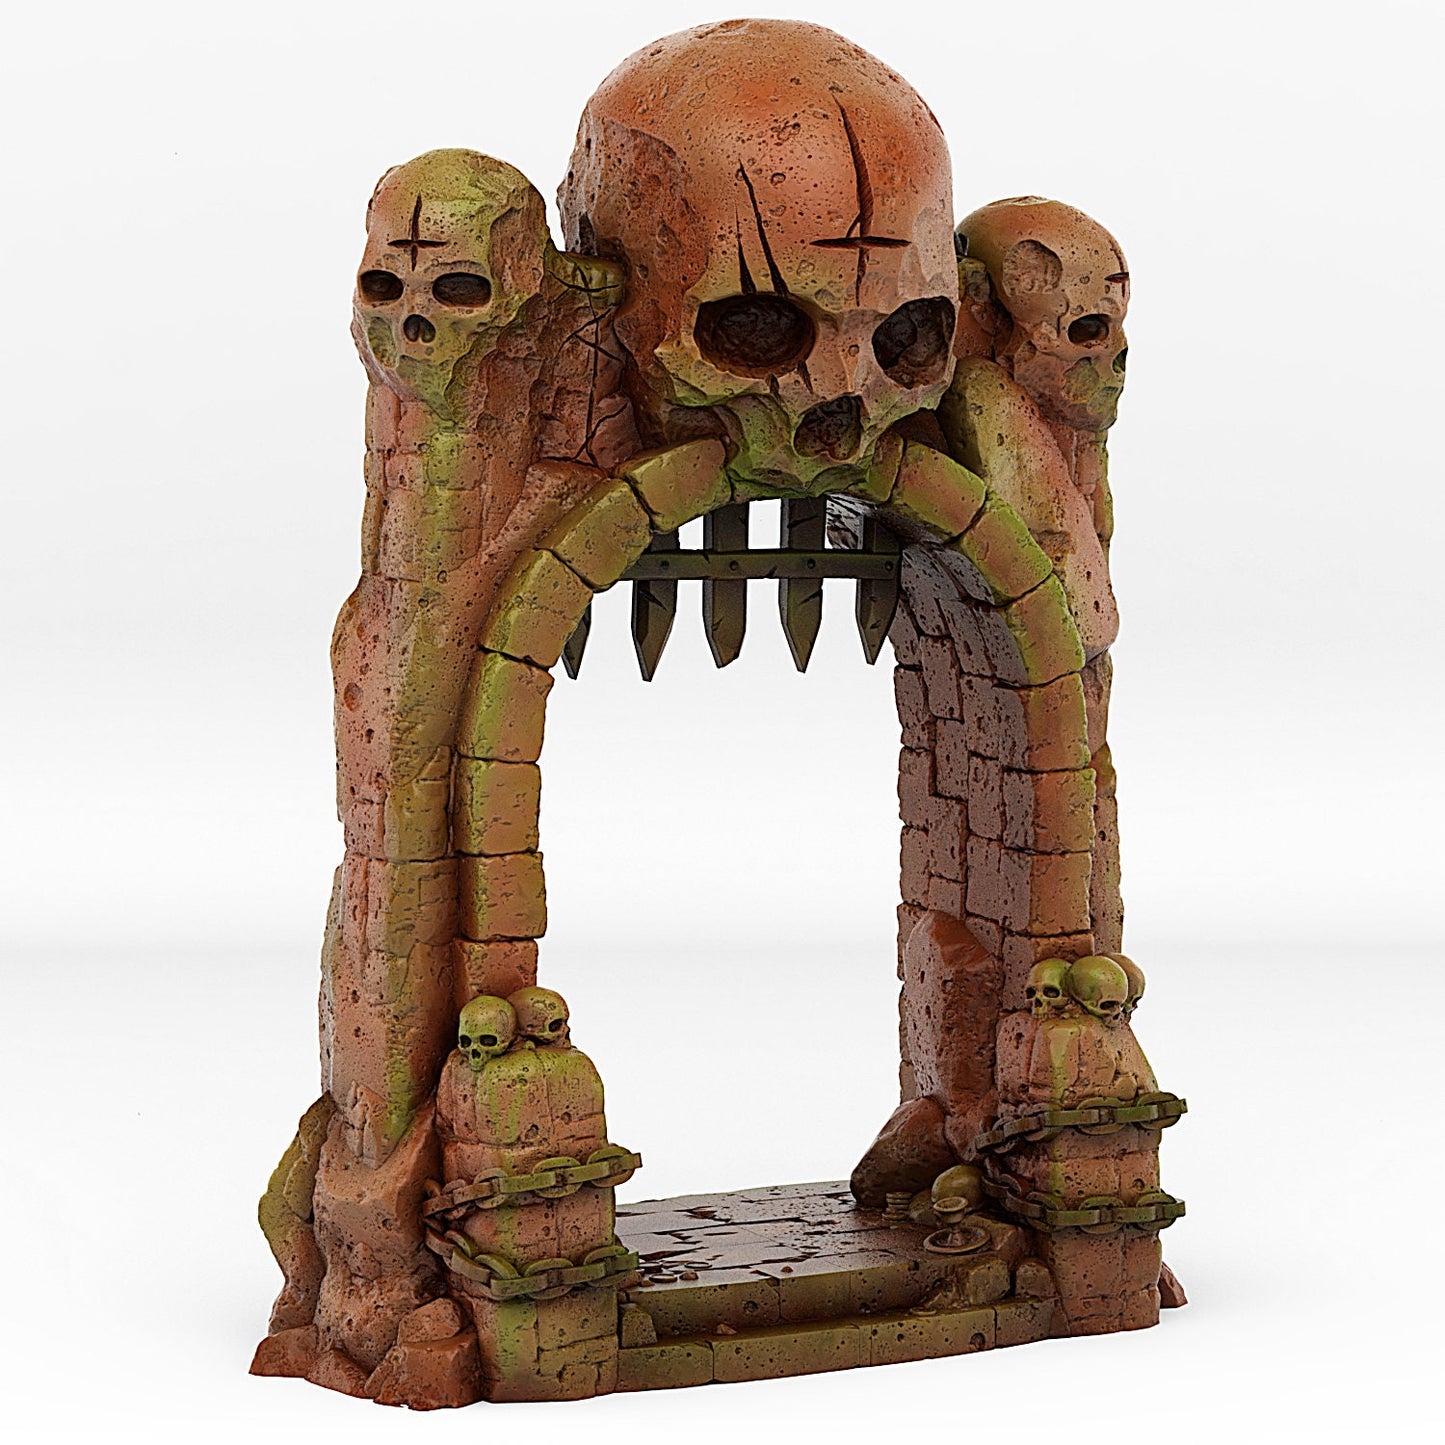 Dungeon Entrance Portal | Scenery and terrain | 3D Printed Resin Miniature | Tabletop Role Playing | AoS | D&D | 40K | Pathfinder